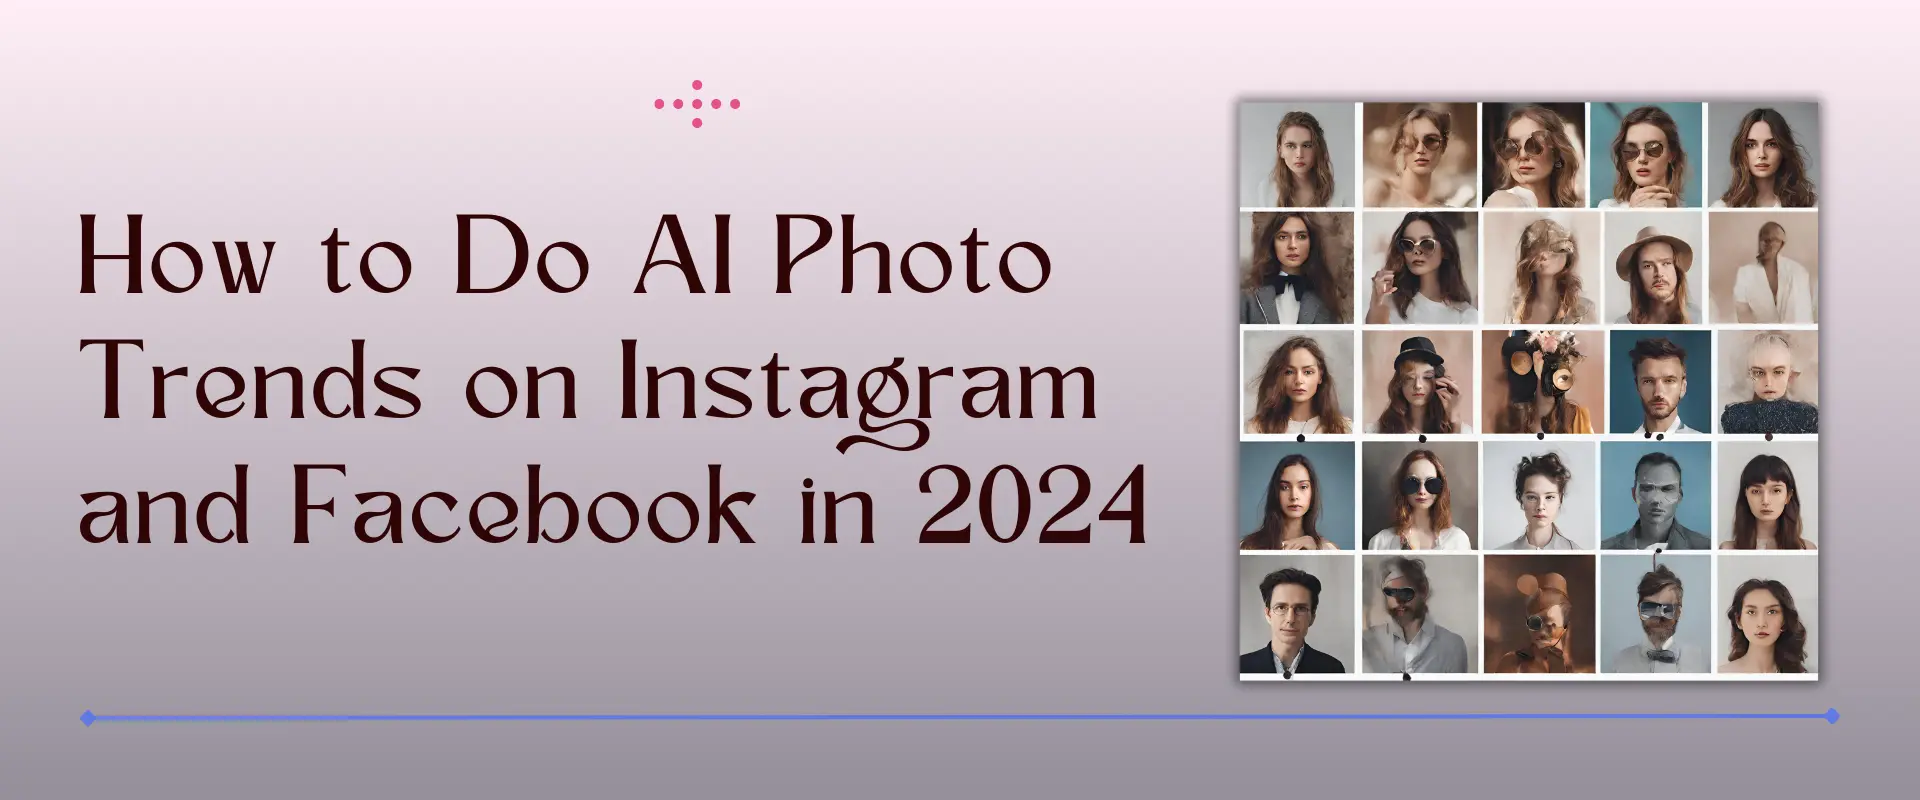 How to Do AI Photo Trends on Instagram and Facebook in 2024